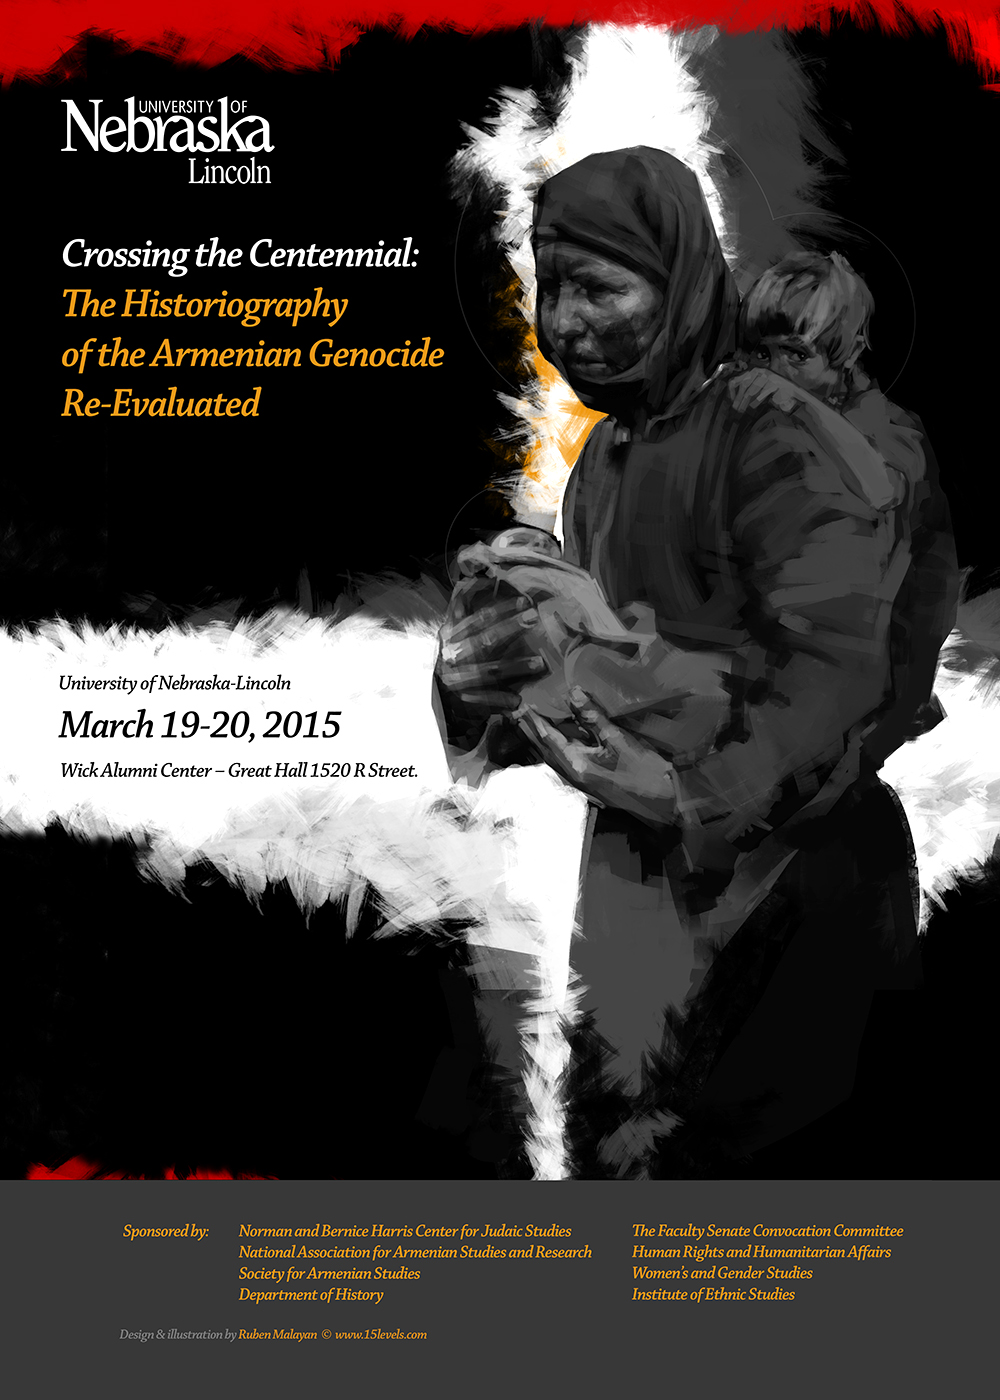 Conference examining Armenian genocide is March 19-20